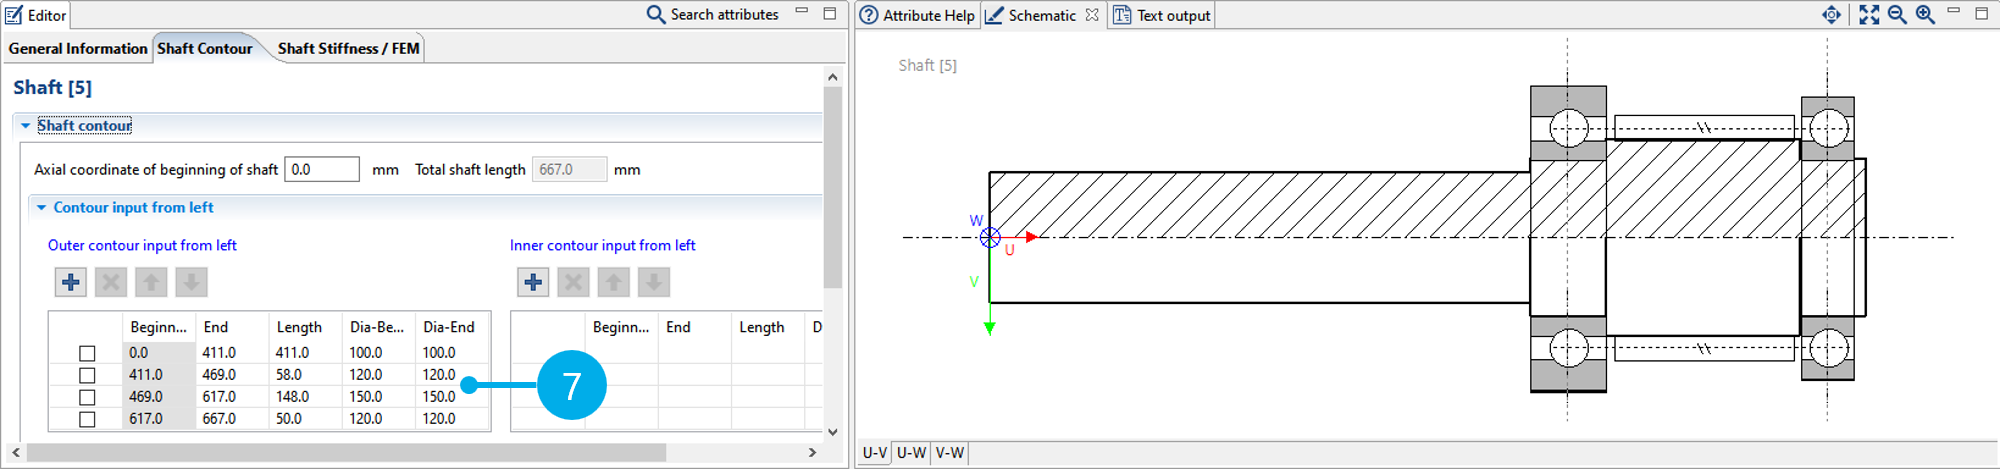 CAD-shaft-analytical-contour-modelling.png